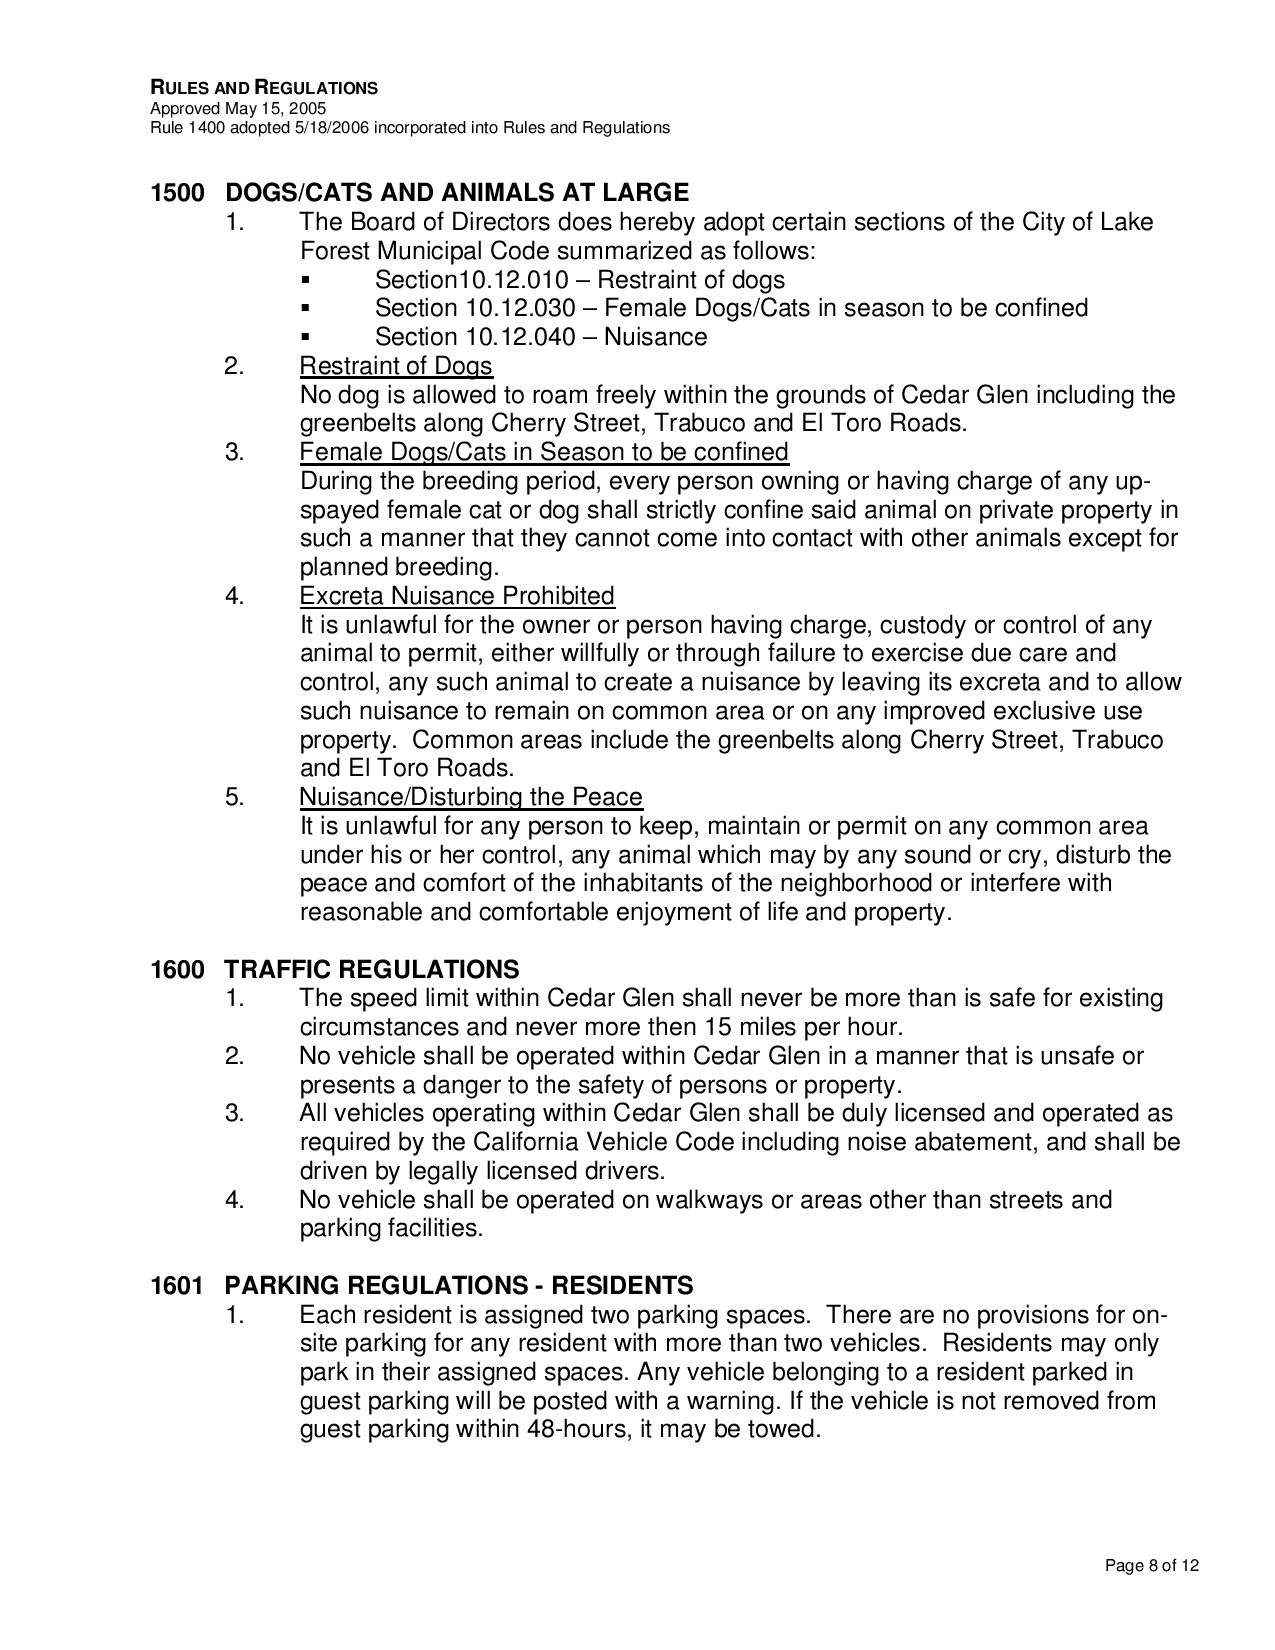 Page 8 of the HOA Rules and Regulations